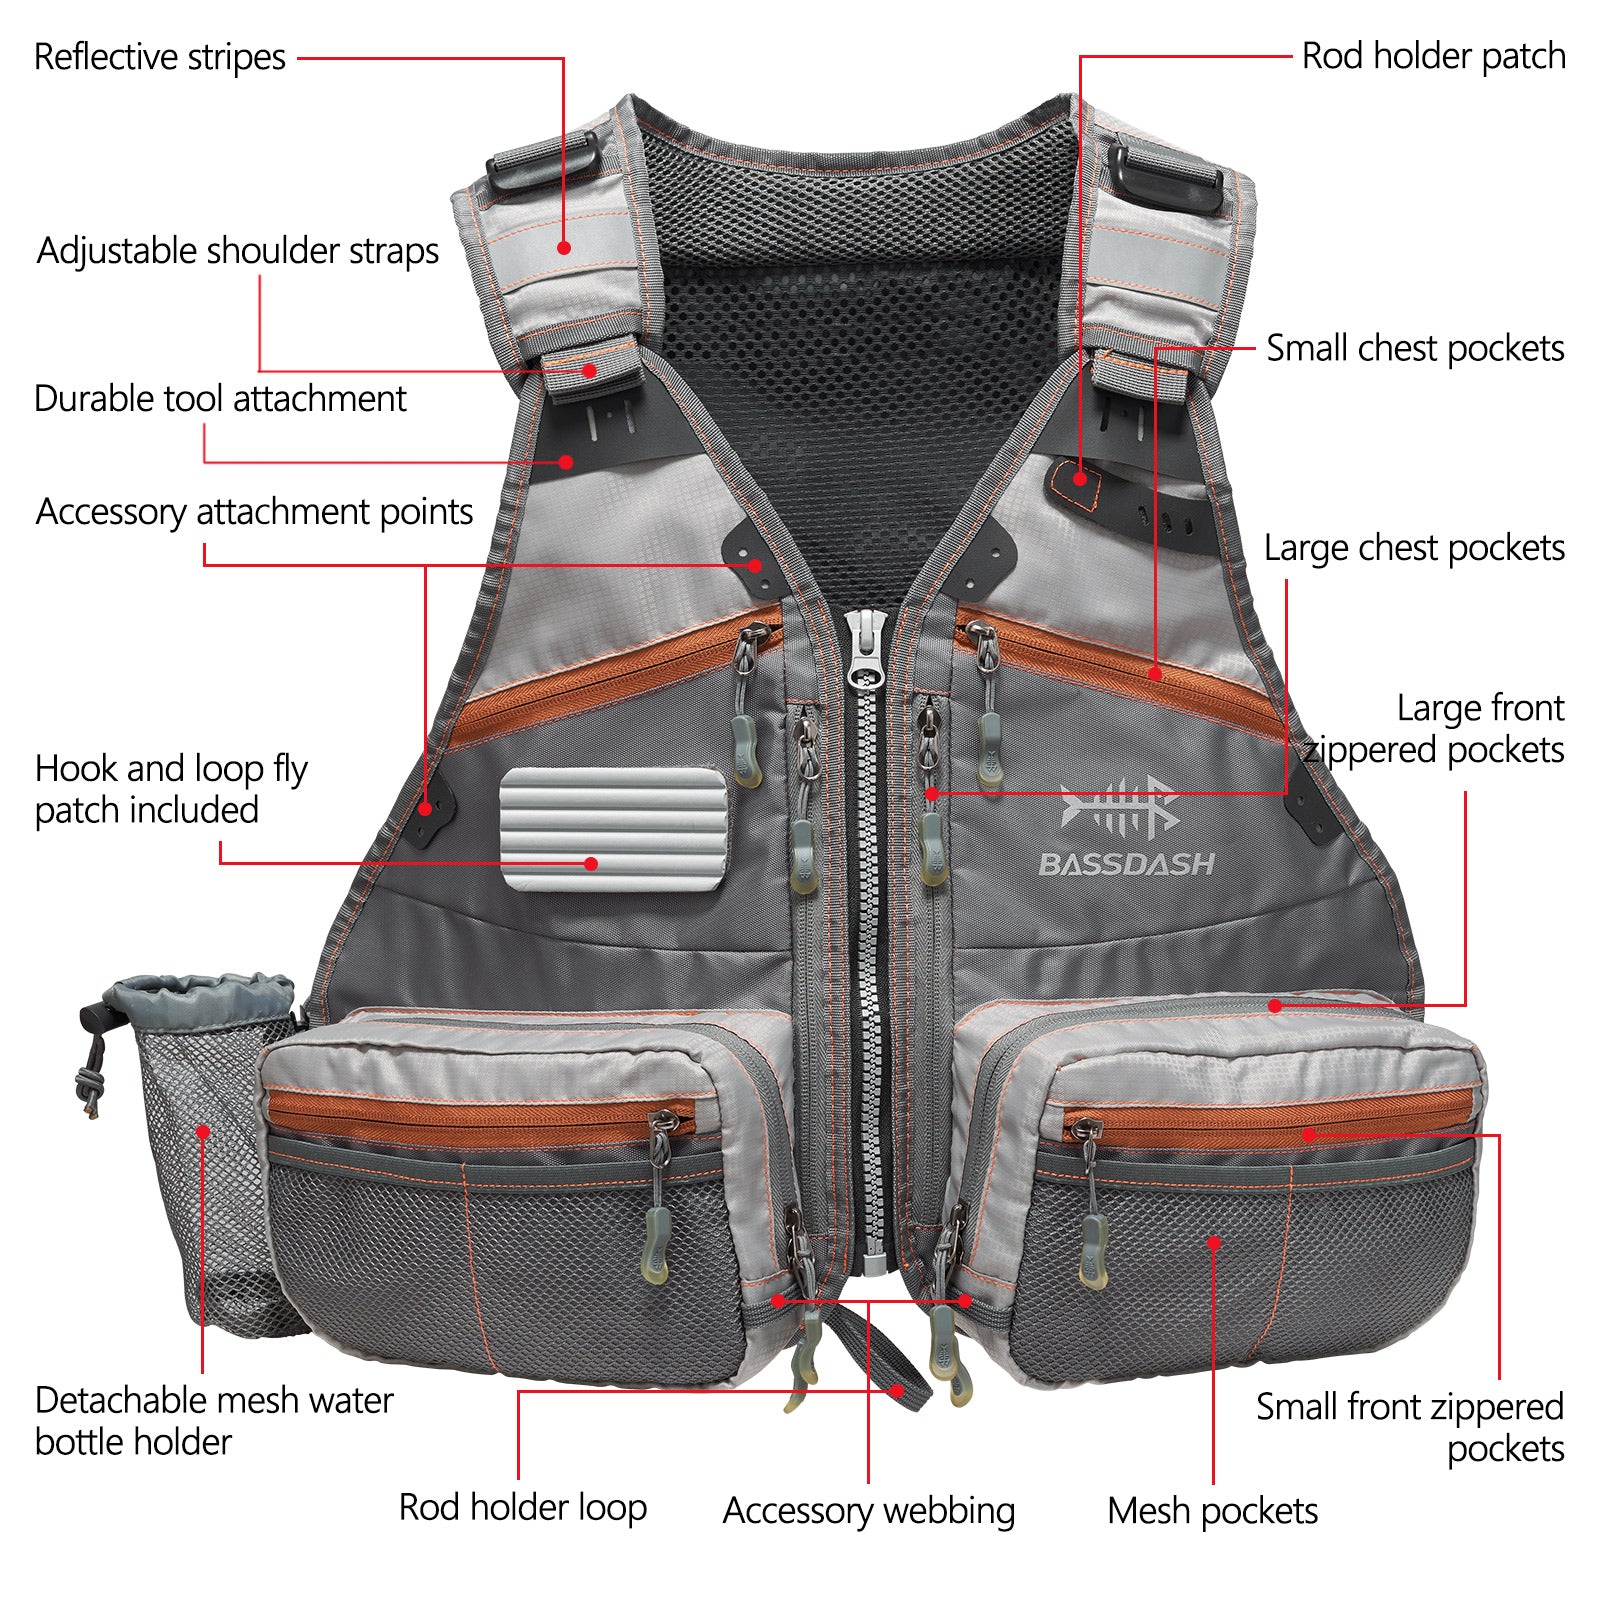 Bassdash FV07 Fly Fishing Vest for Men and Women Adjustable Size with Detachable Water Bottle Holder, Women’s - Grey/Light Pink - One Size